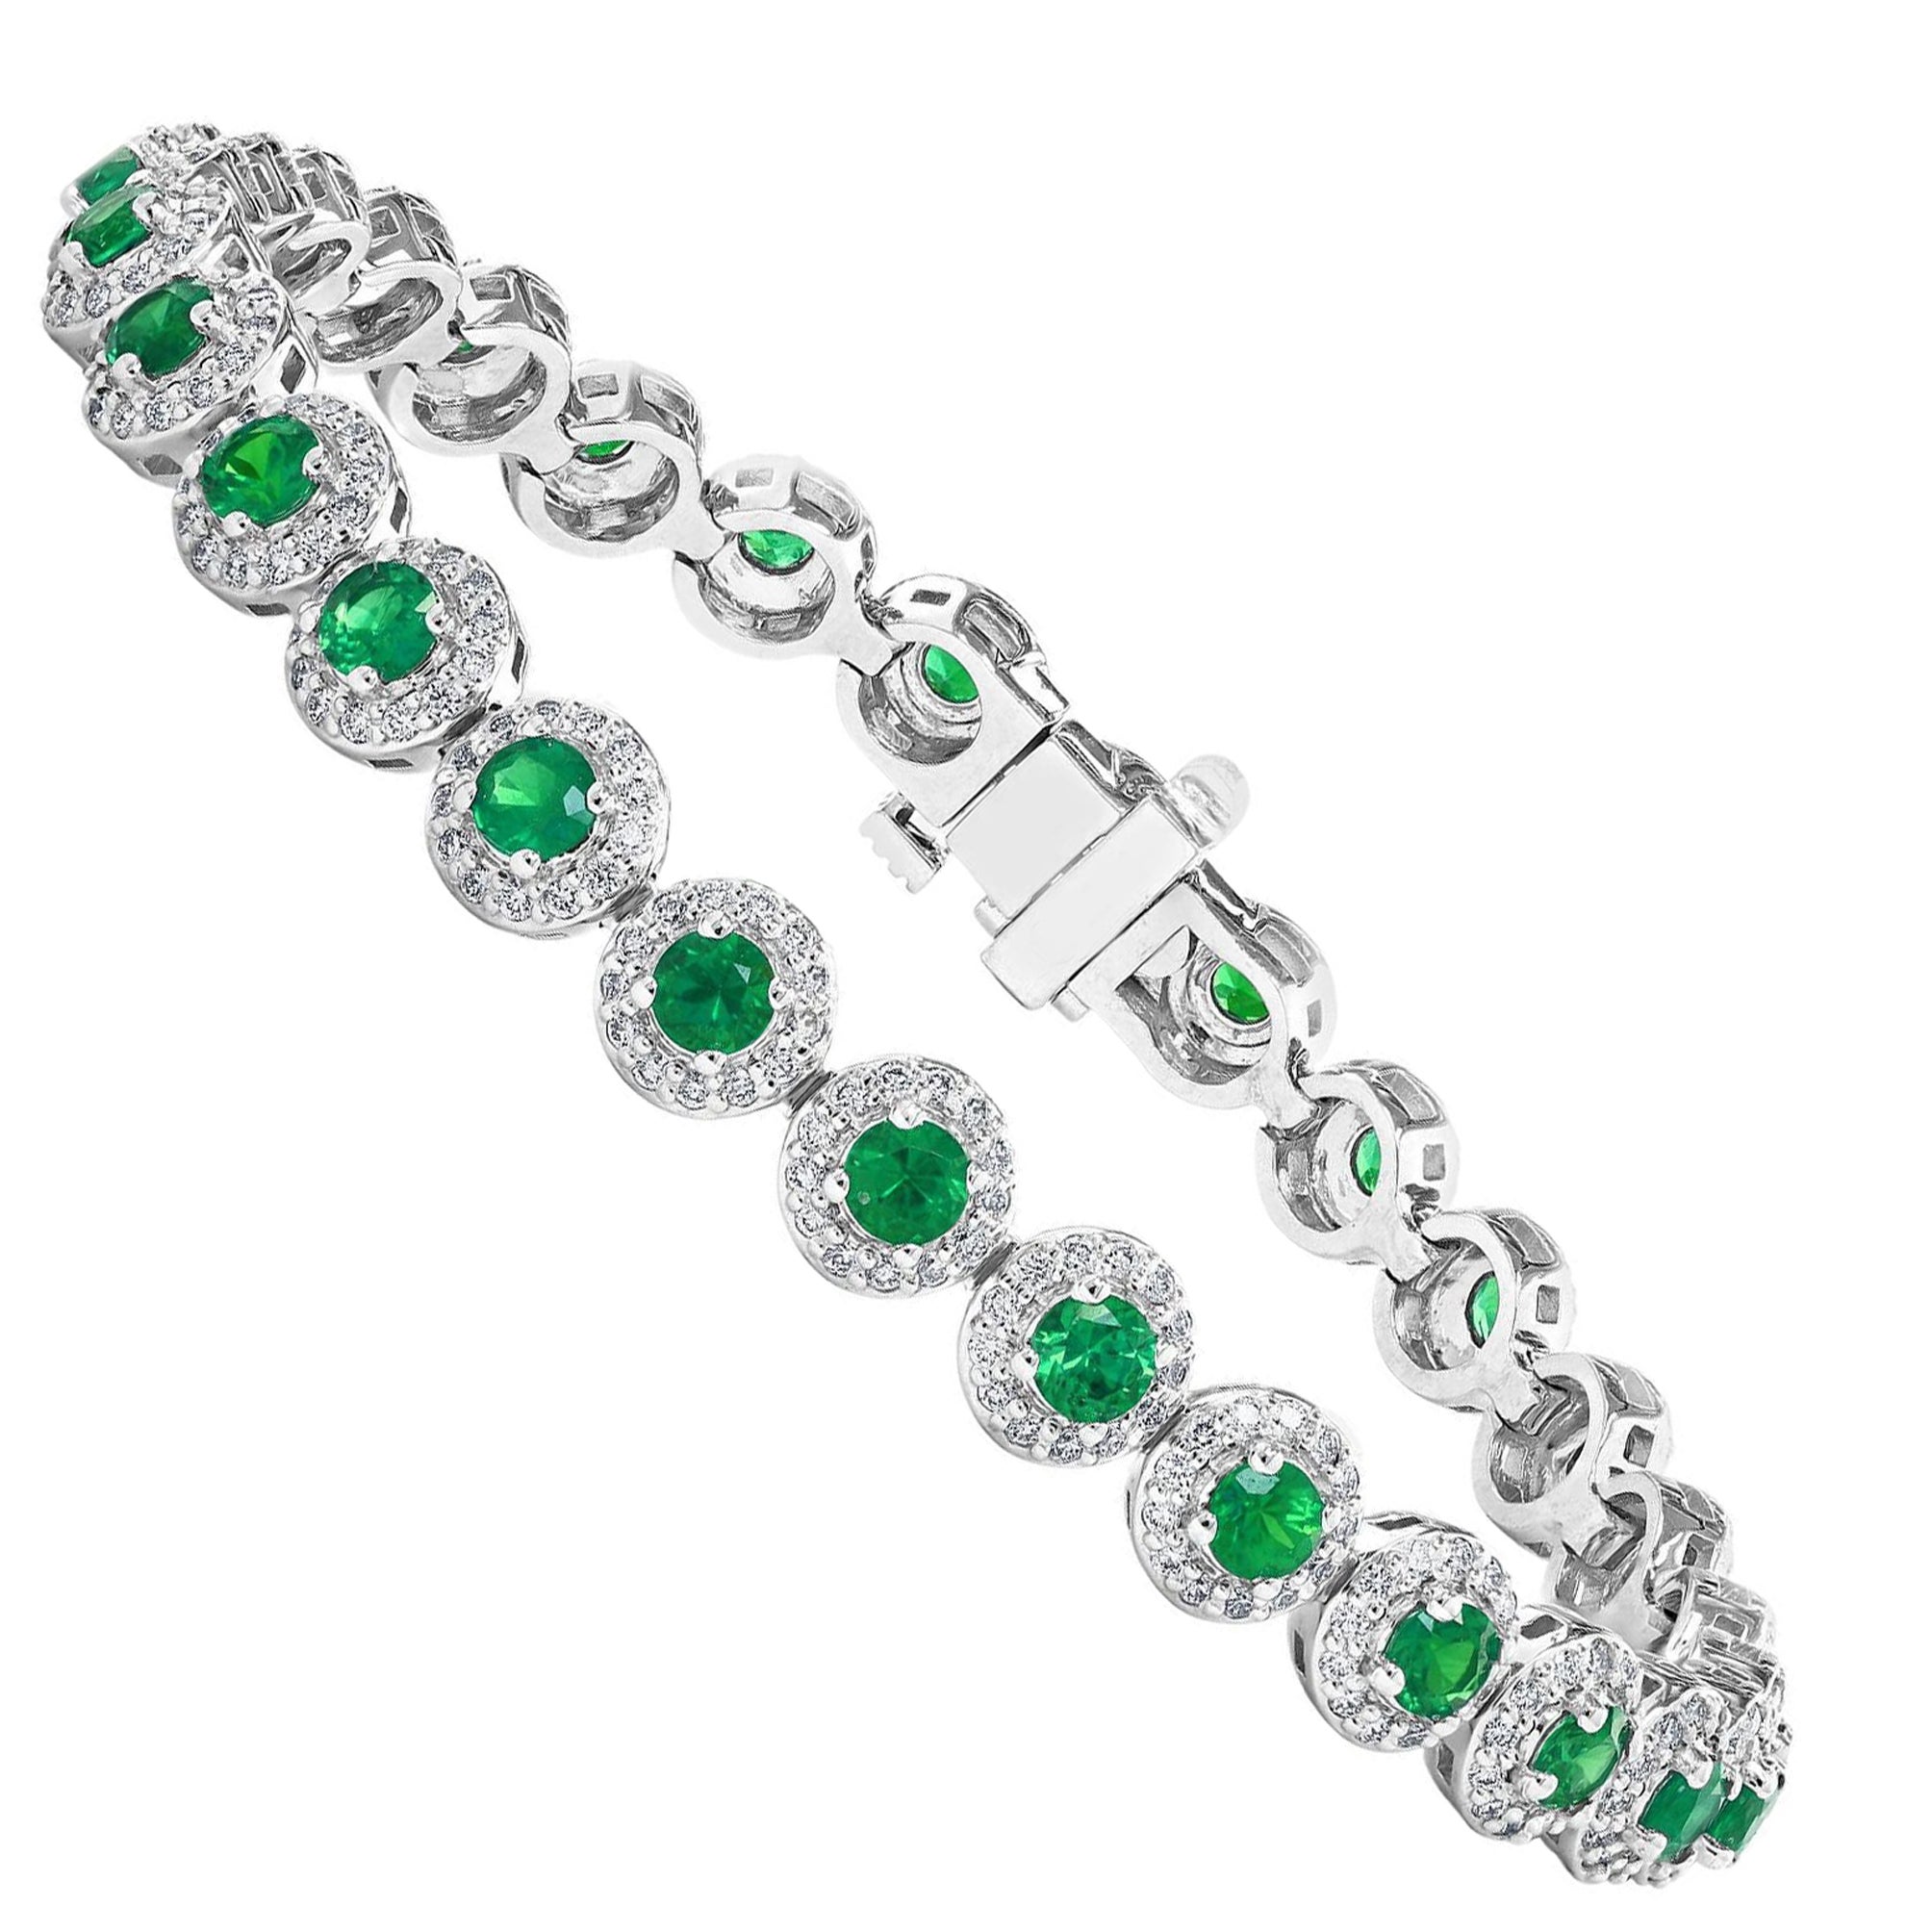 3.05 Carat Round Cut Emerald and Diamond Tennis Bracelet in 14K White Gold For Sale